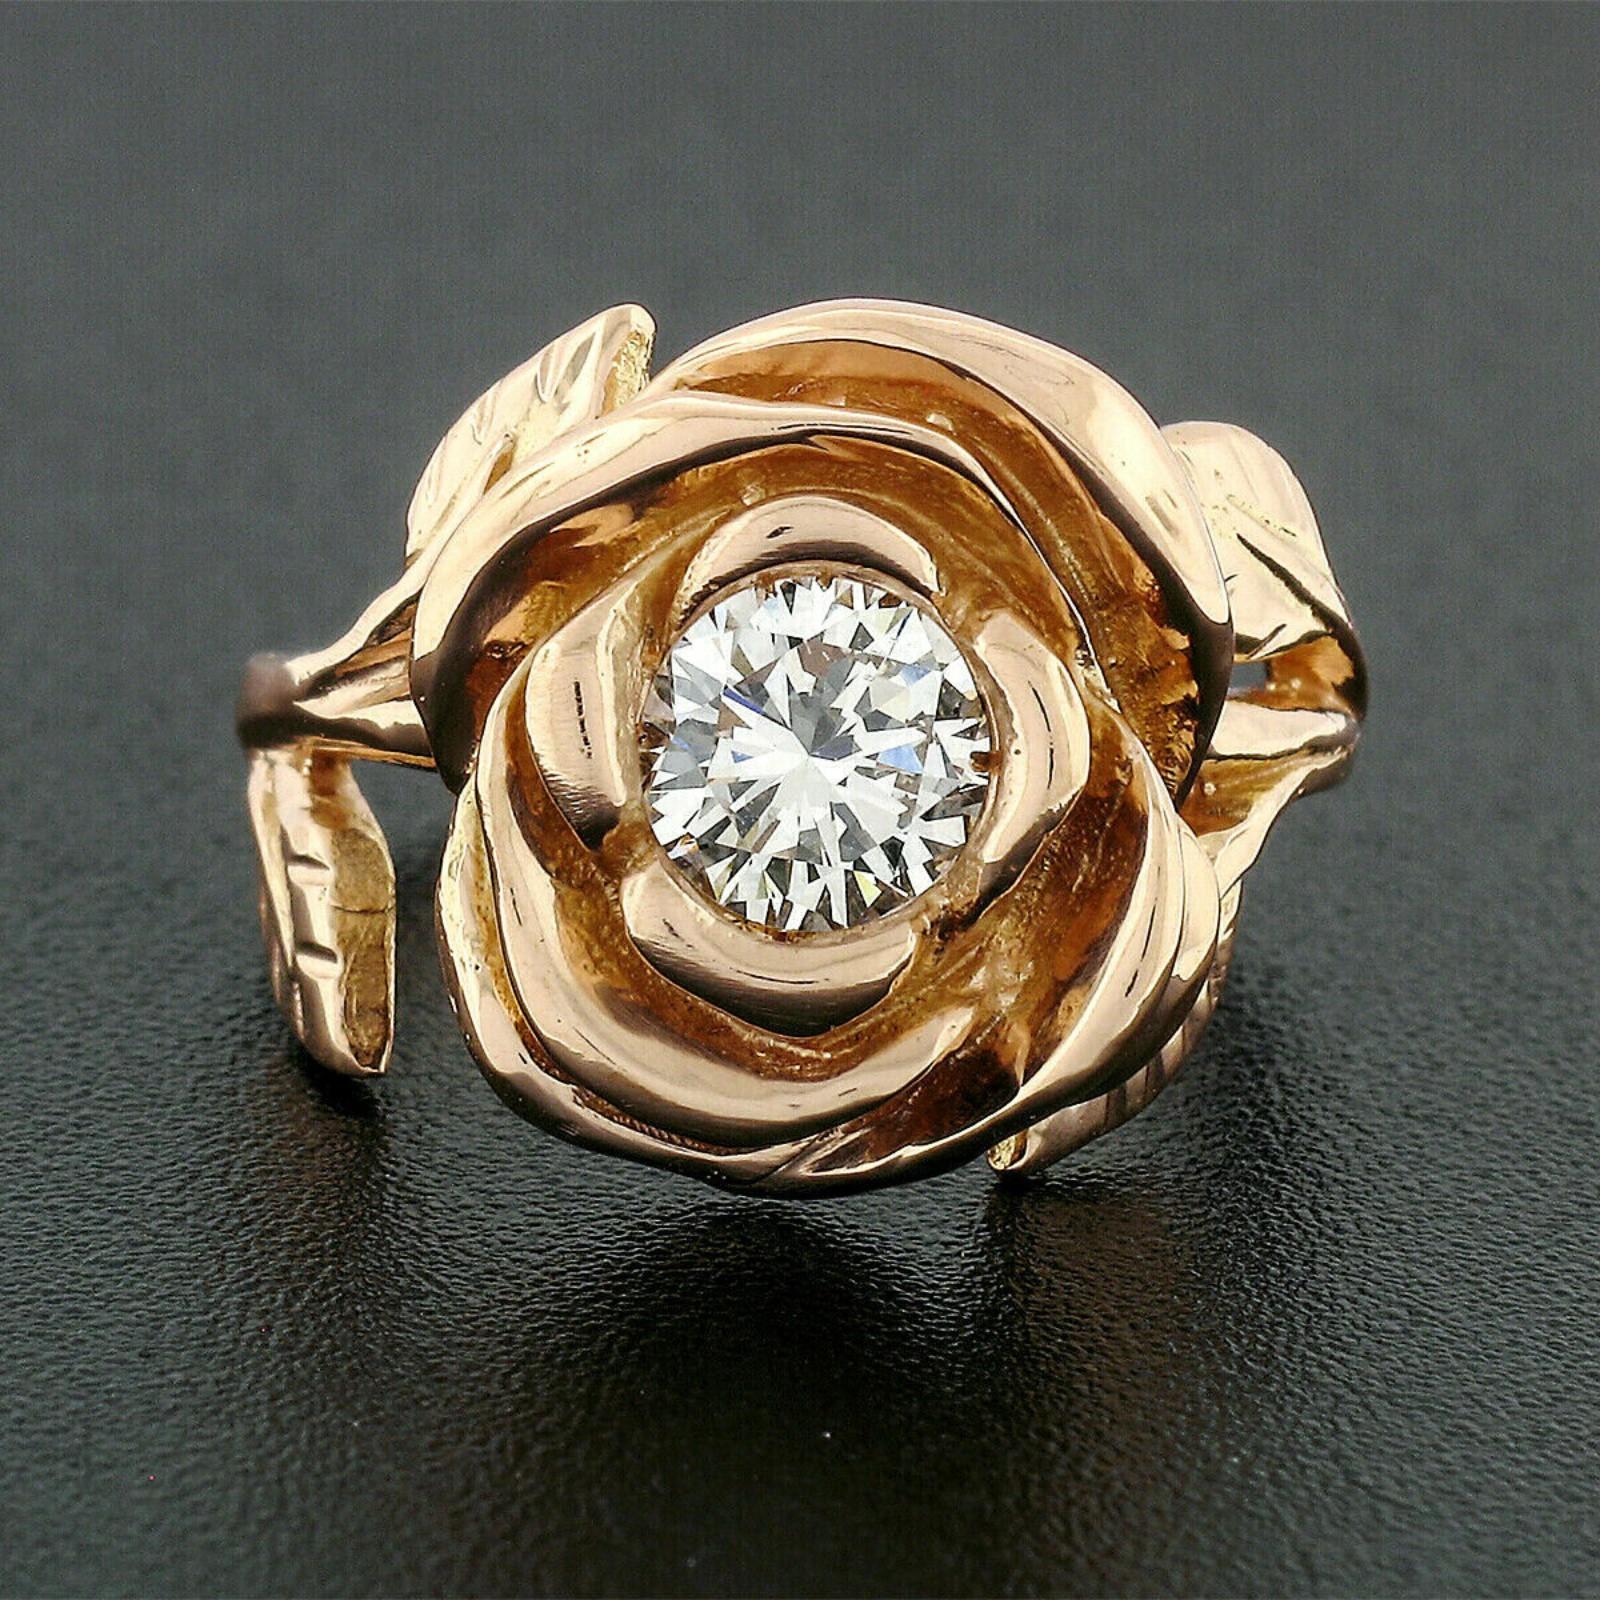 Here we have a gorgeous diamond rose flower ring hand crafted in solid 18k rose gold. The ring features a very unique and truly heart warming rose flower design, prong set with a round brilliant cut at its center. This solitaire diamond weighs 0.72